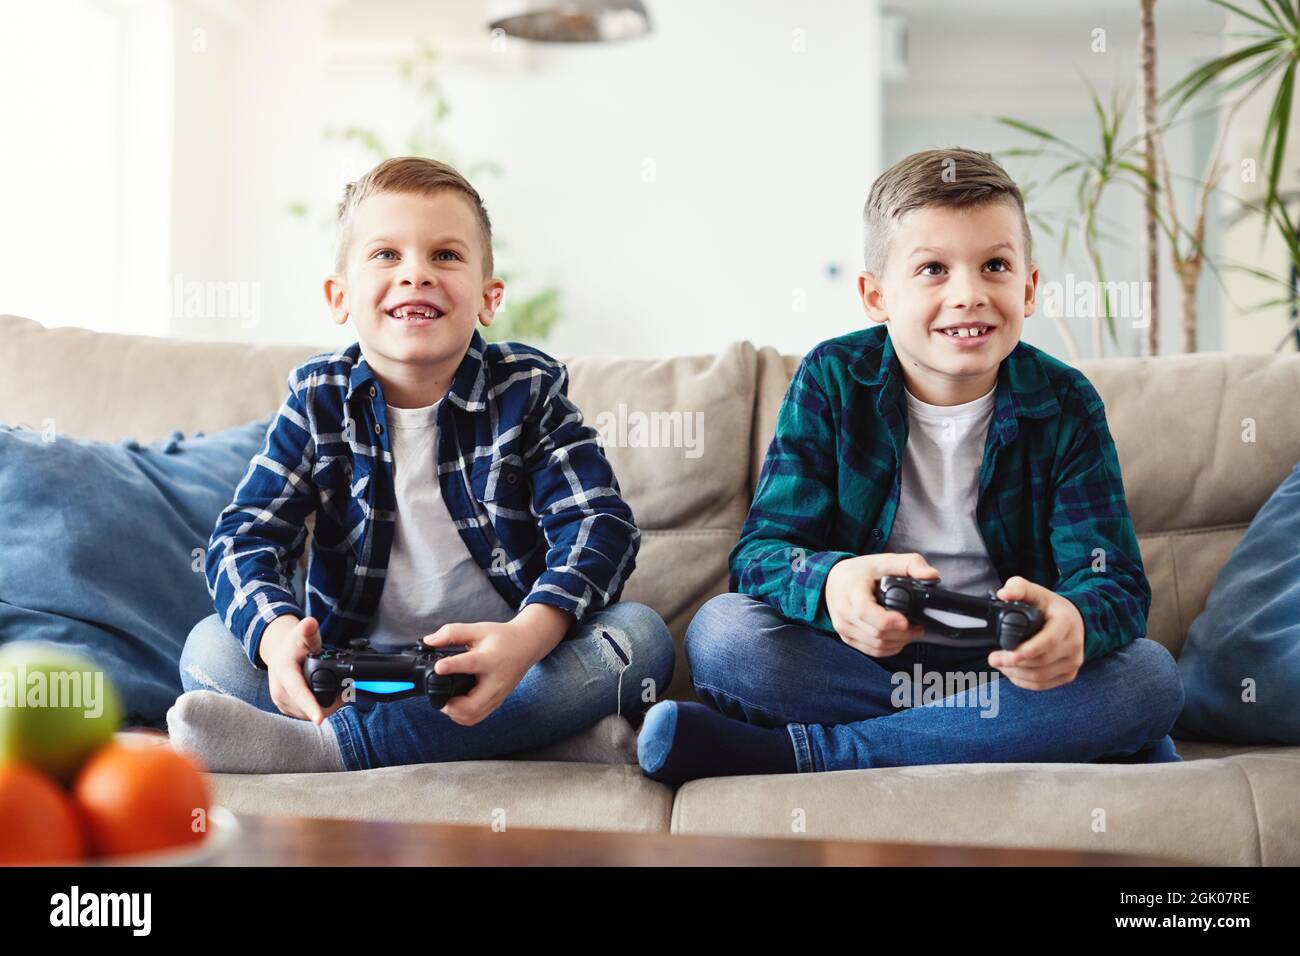 child brother friend having fun playing console laughing happy kid Stock Photo